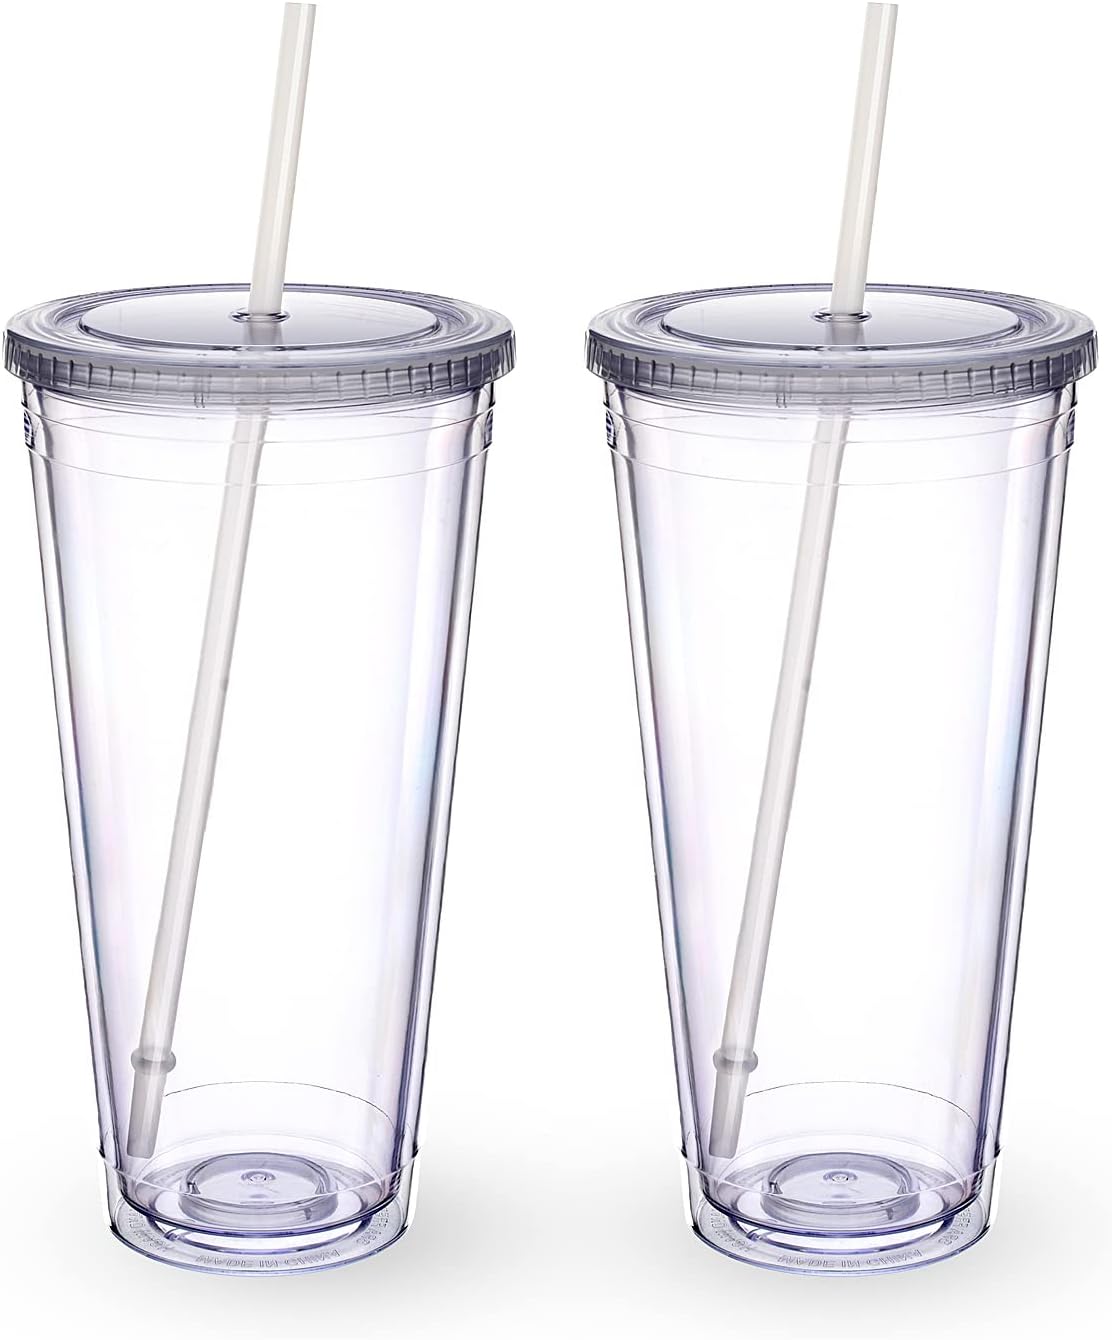 Zephyr Goods 24 oz Double Wall Plastic Tumblers with Lids and Straws, Large Classic Travel Tumbler, Set of 4, Clear Reusable Cups with Straws